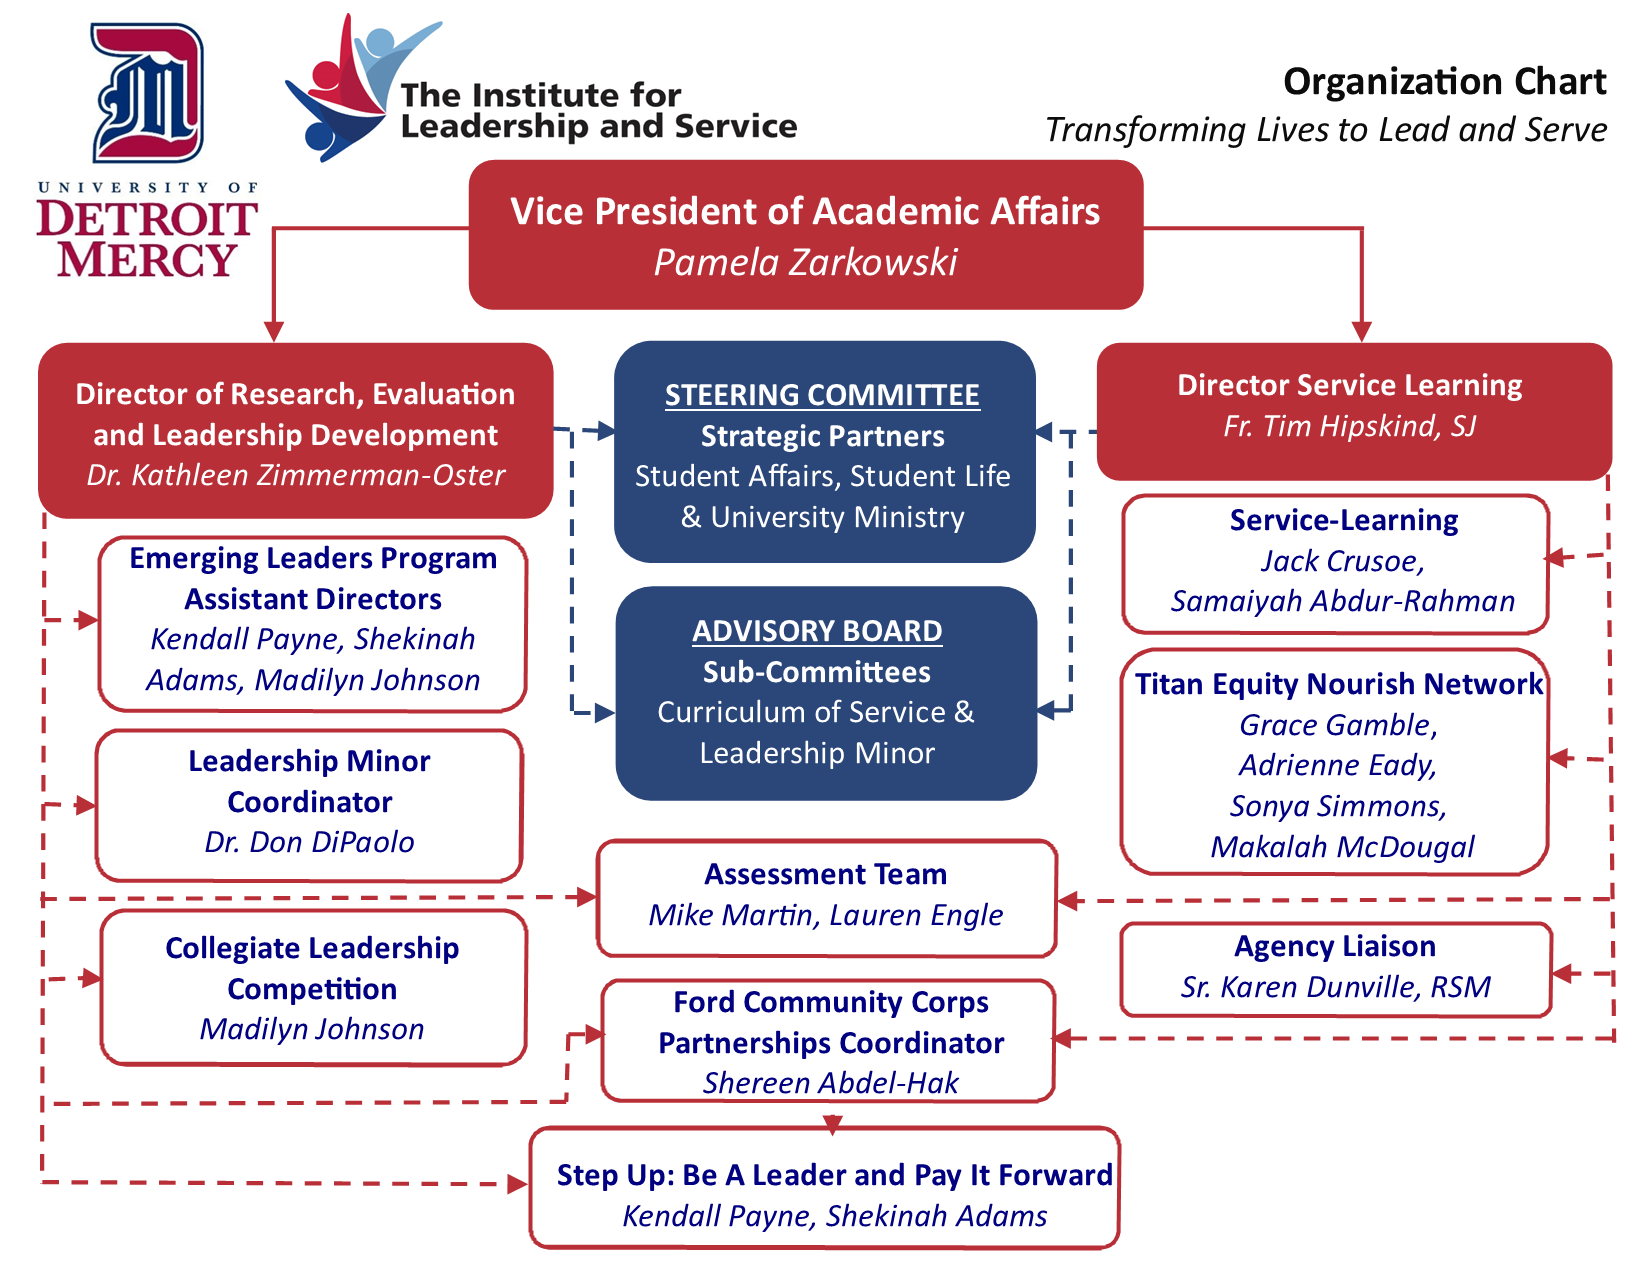 Institute for Leadership and Service Organizational Chart